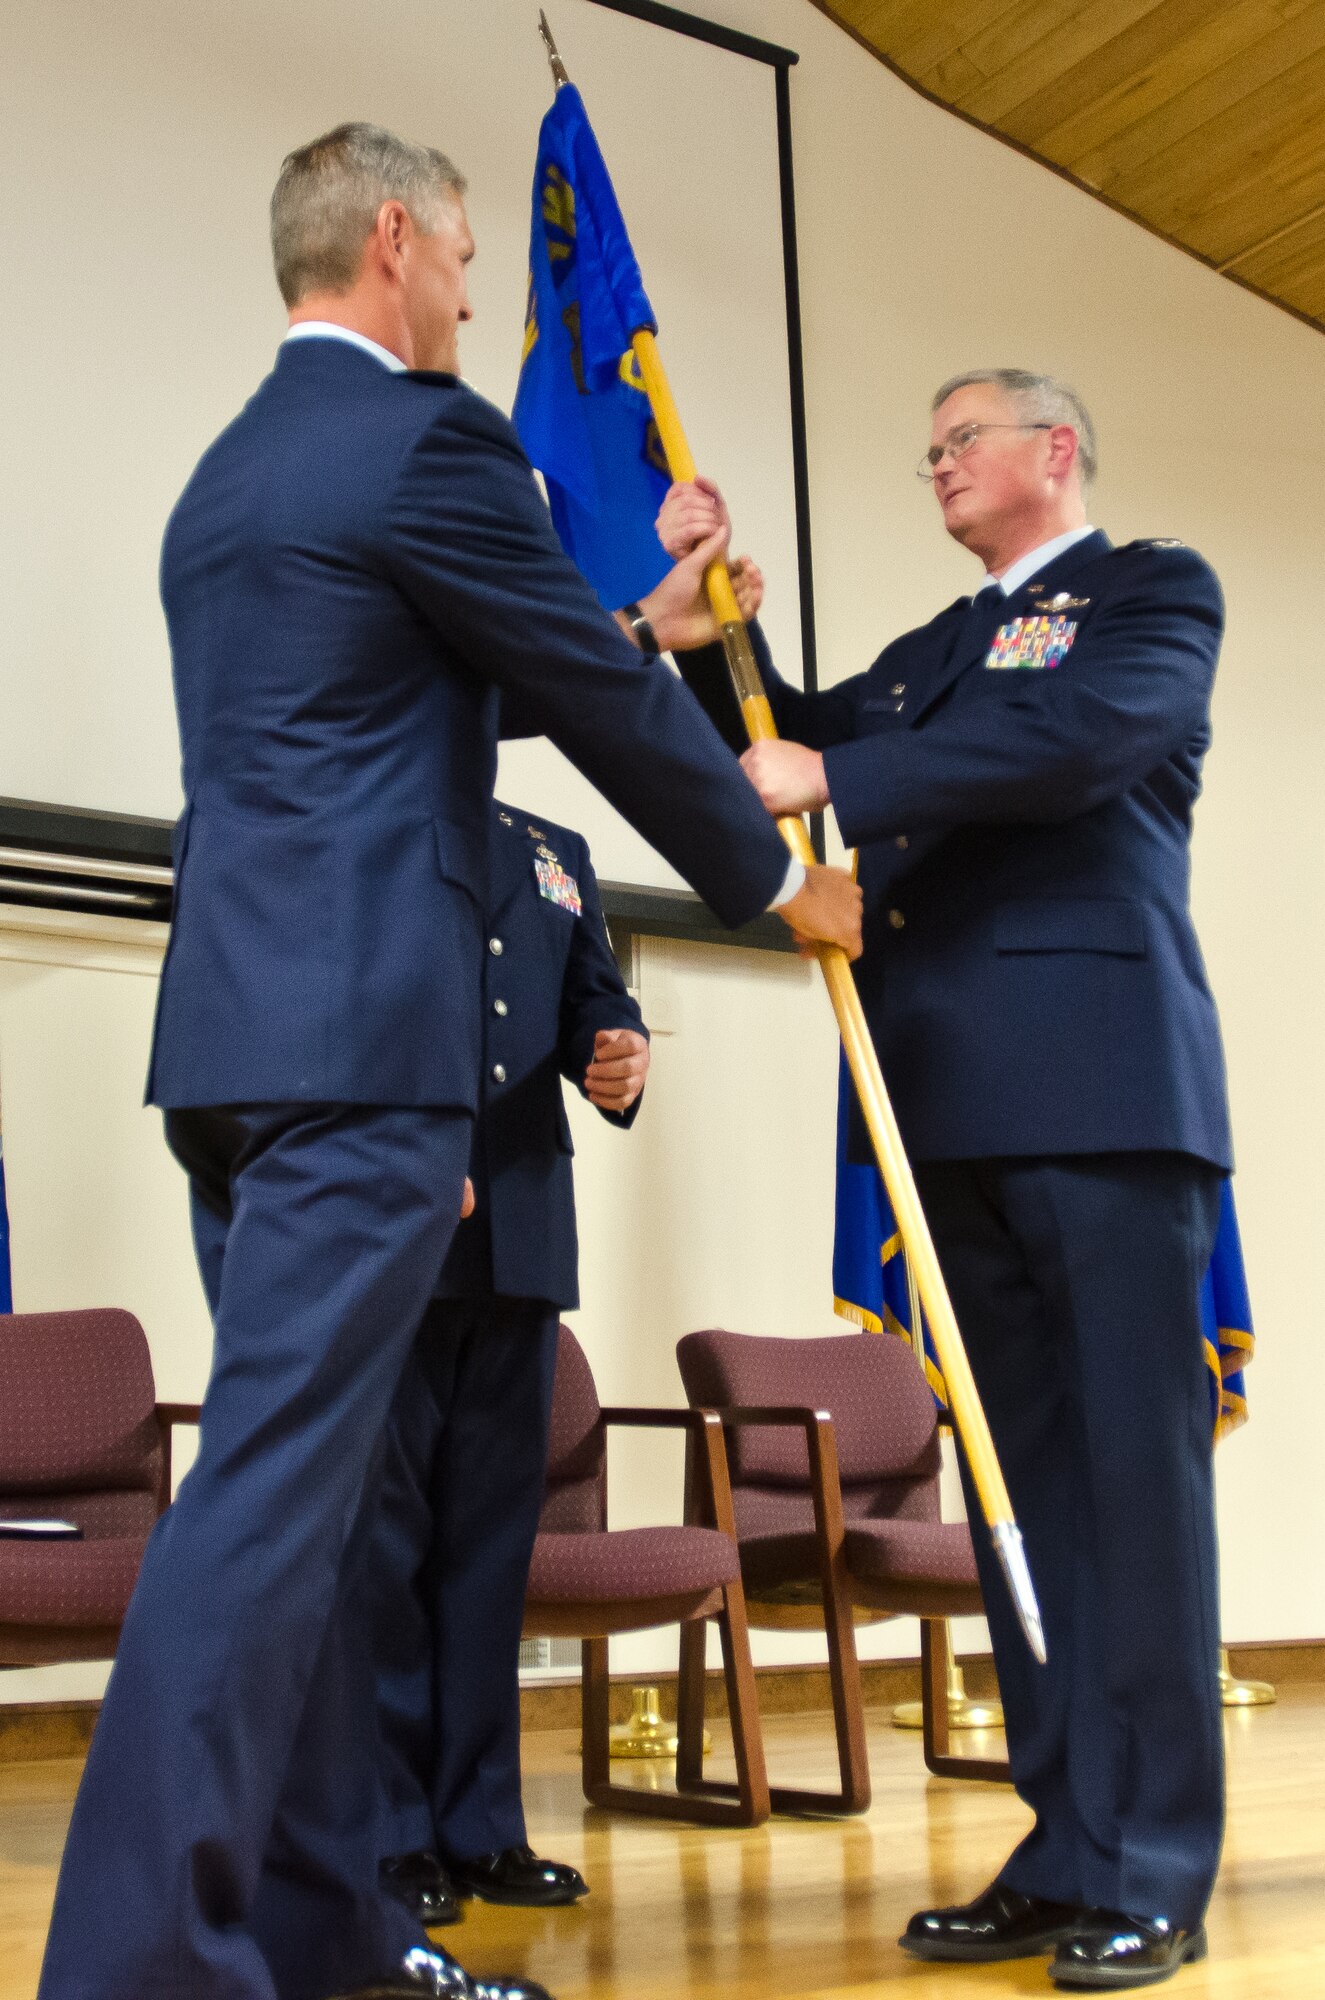 Col. David Mounkes assumes command of the 123rd Contingency Response Group as he accepts the unit’s guidon from Col. Barry Gorter, commander of the 123rd Airlift Wing, during a change-of-command ceremony held at the Kentucky Air National Guard Base in Louisville, Ky., July 12, 2014. Mounkes replaces Col. Mark Heiniger, who is the new director of operations at Headquarters, Kentucky Air National Guard. (U.S. Air National Guard photo by Senior Airman Joshua Horton)